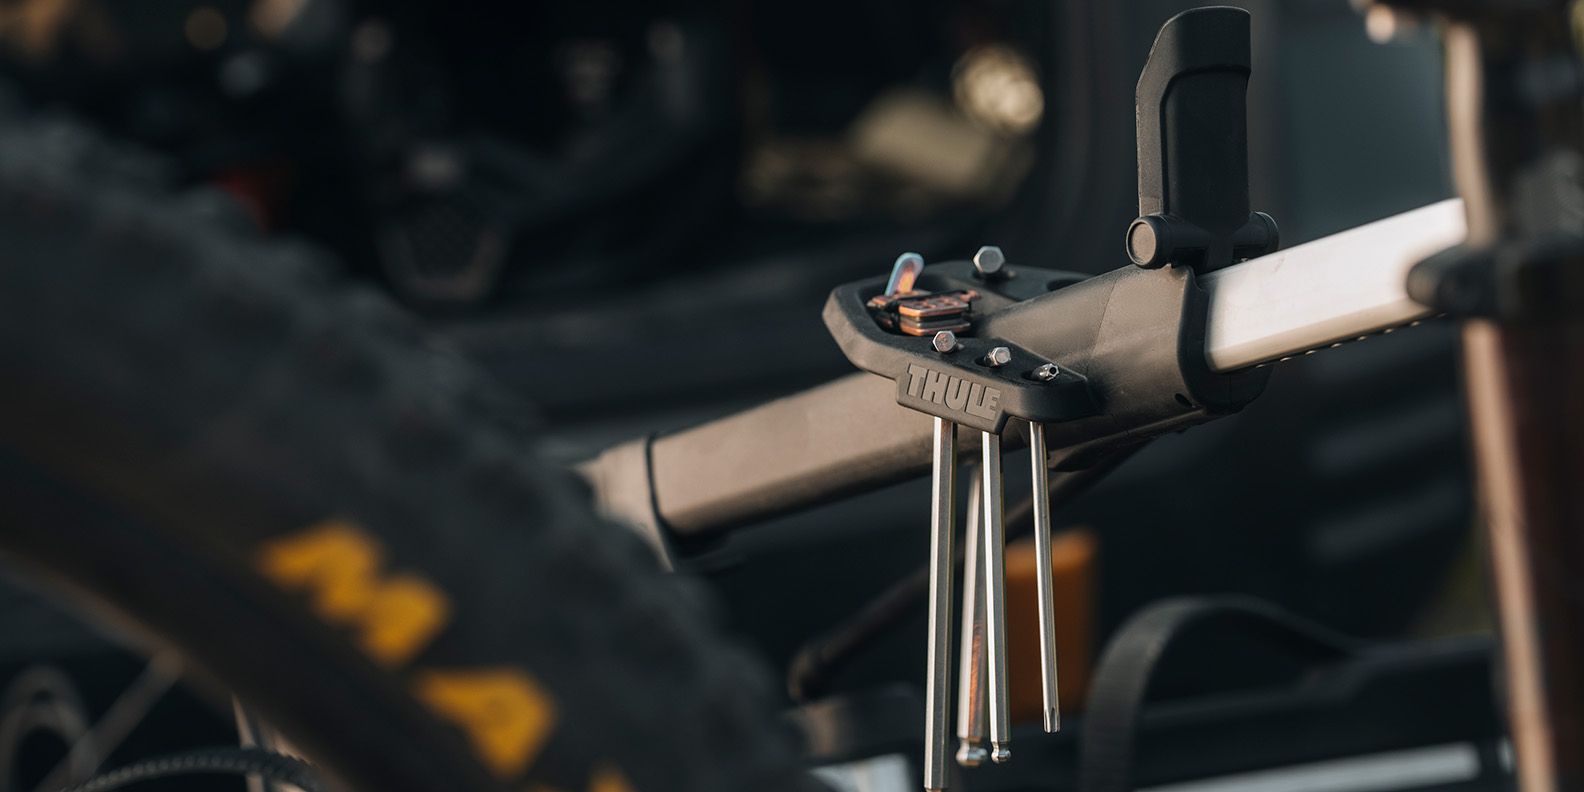 A close up of the Thule Bike Repair Holder (sold separately)